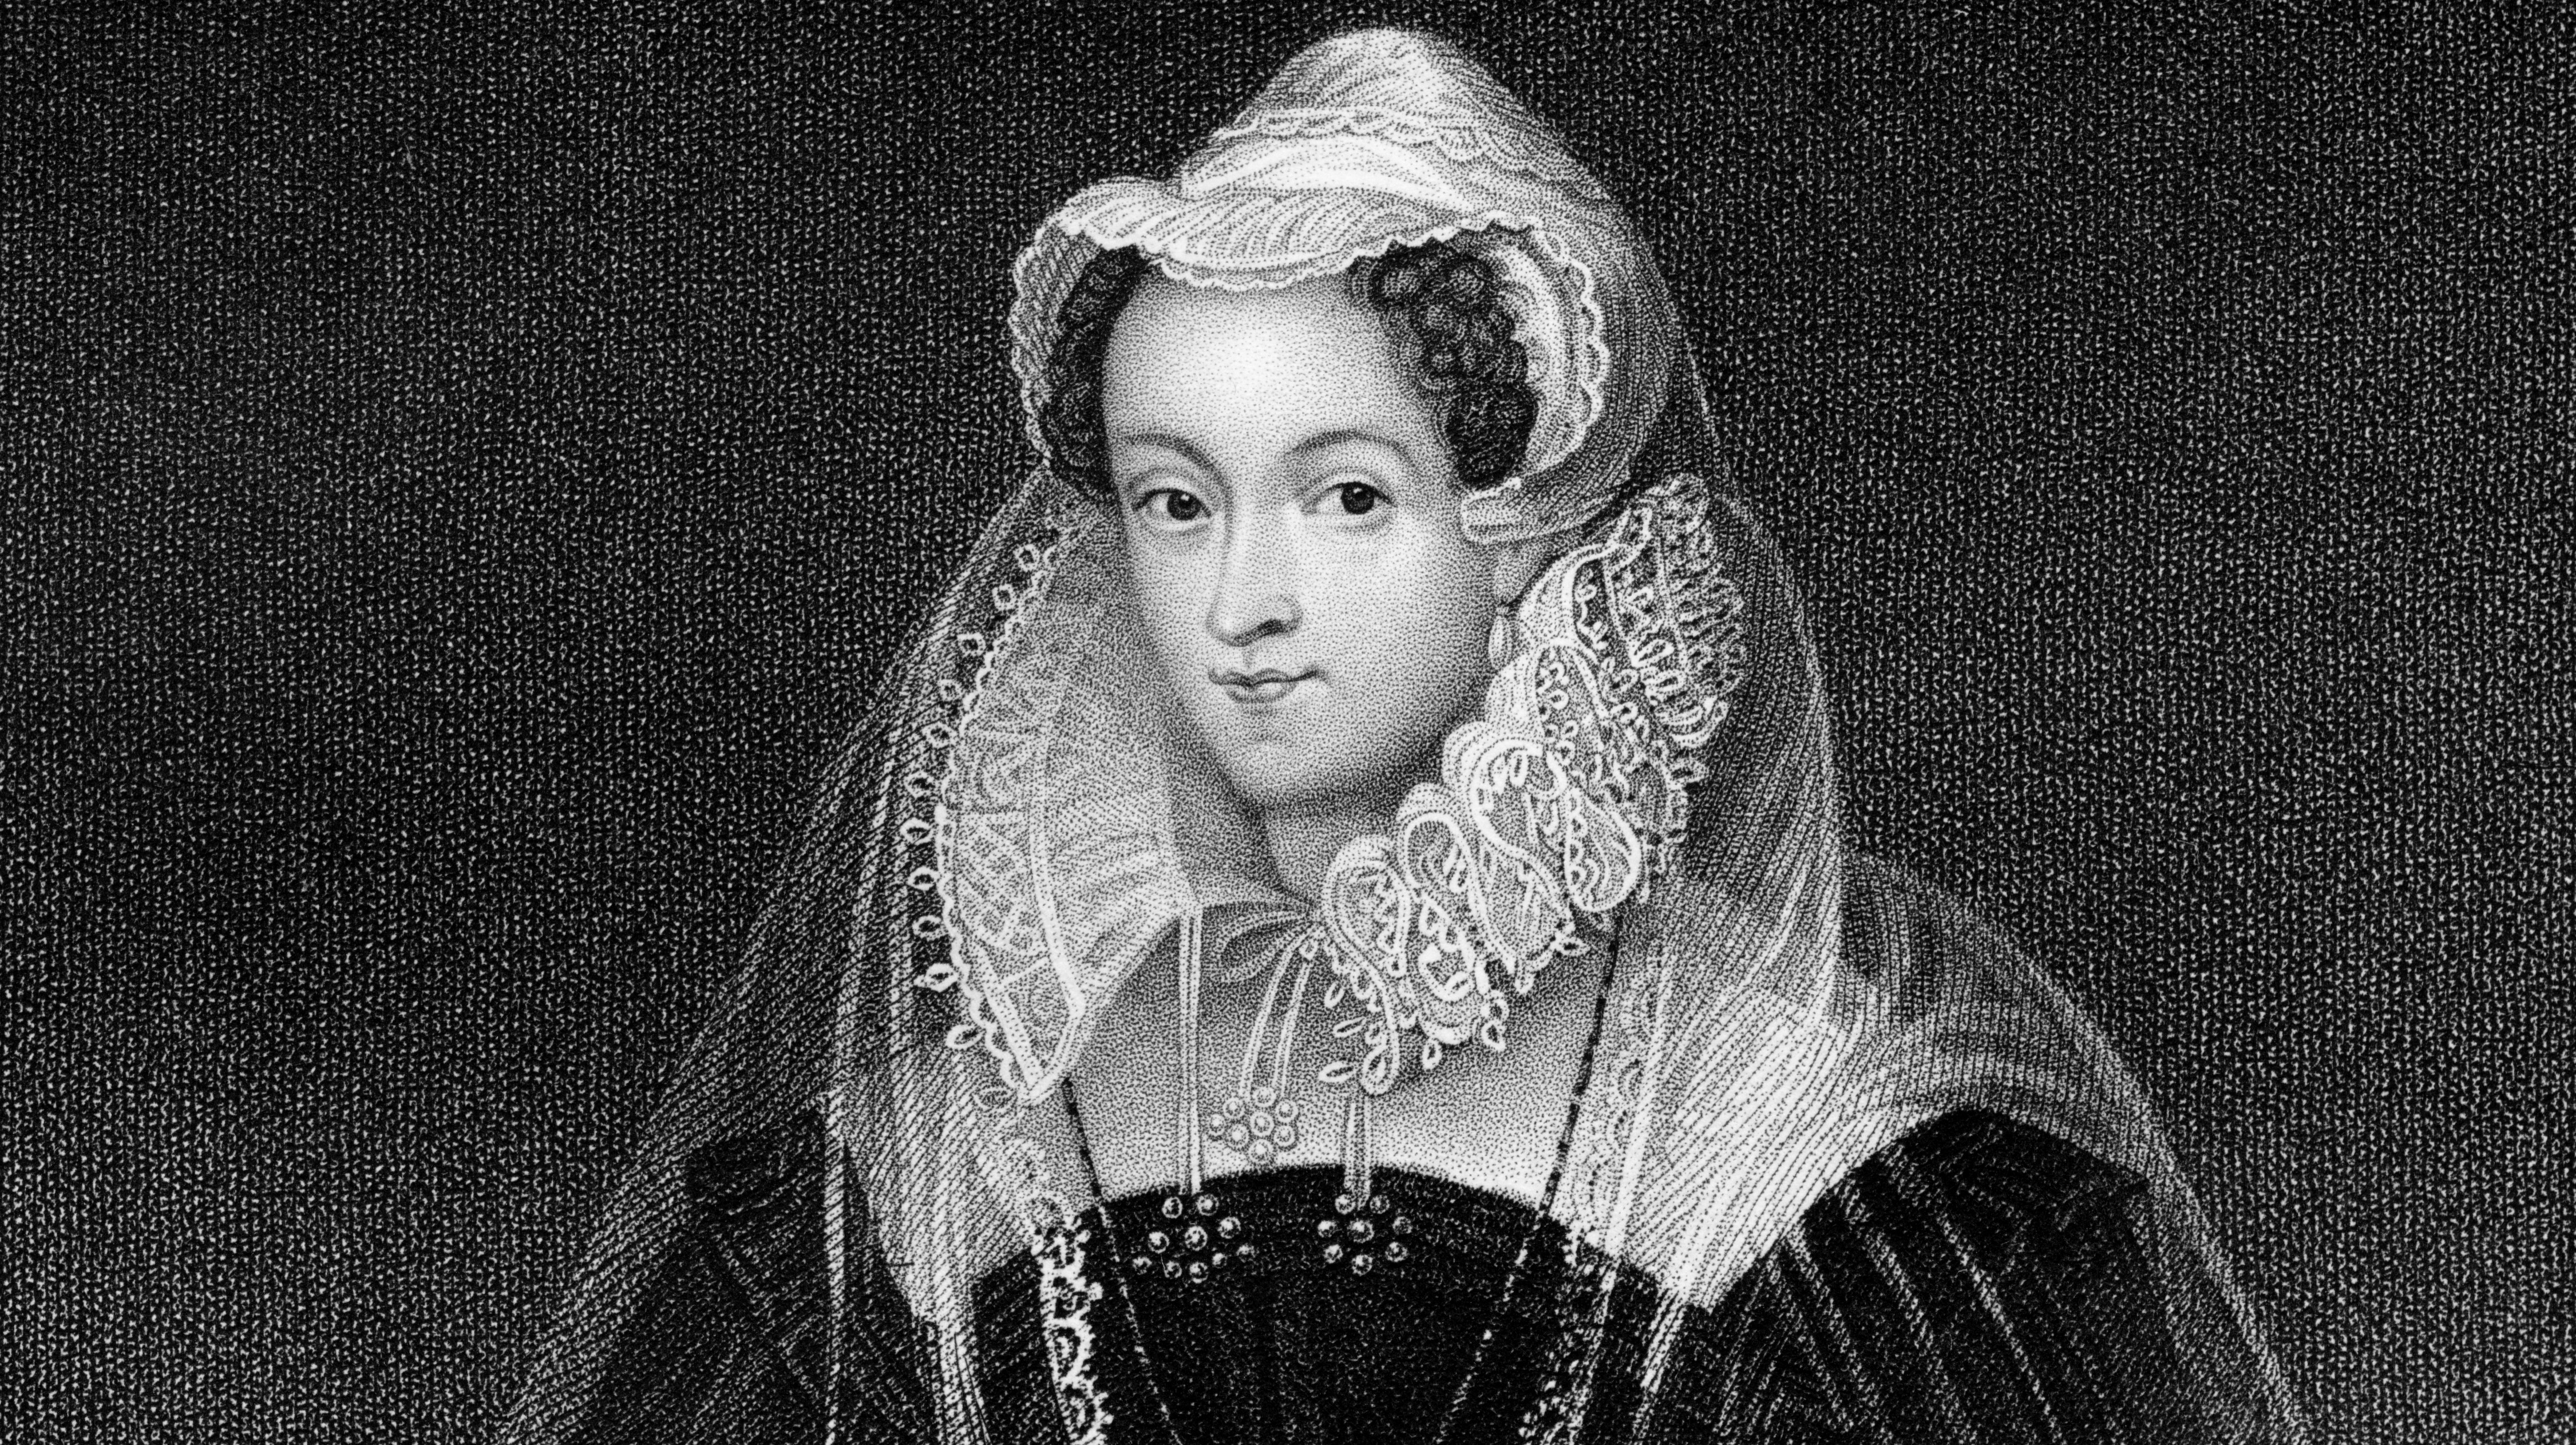 Letters written by Queen of Scots decoded by experts